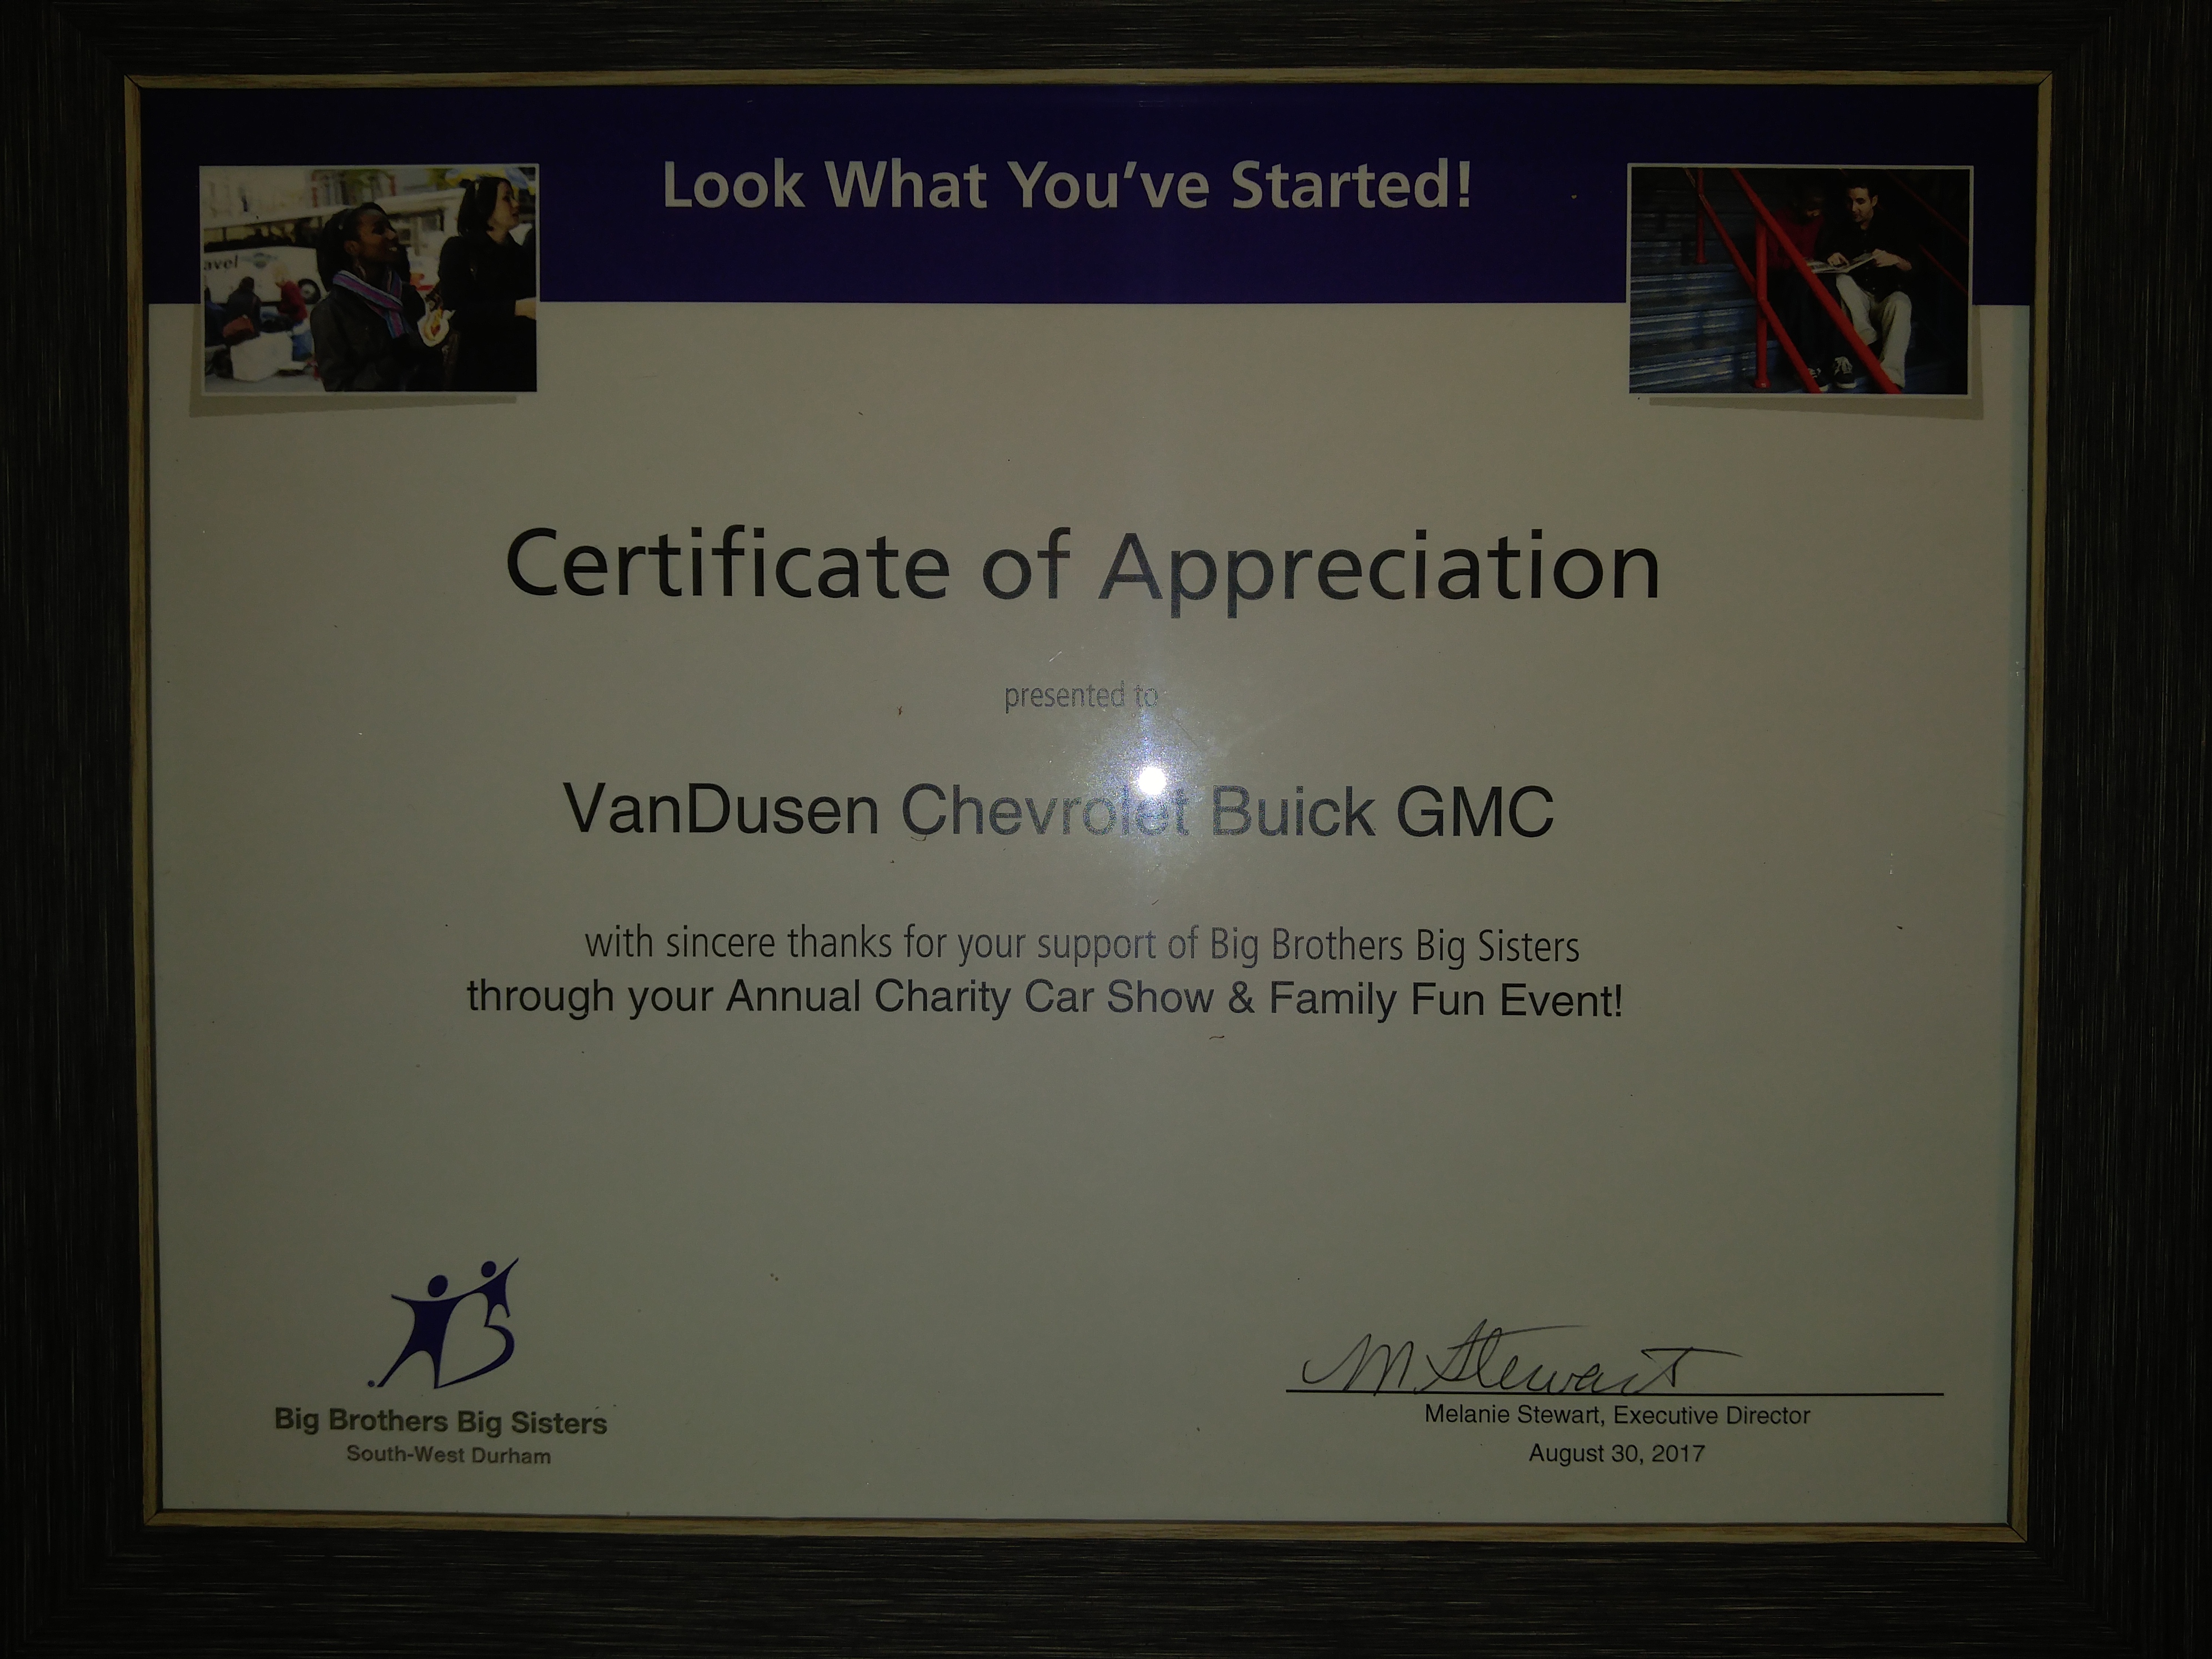 Certificate of Appreciation from Big Brothers Big Sisters of South-west Durham